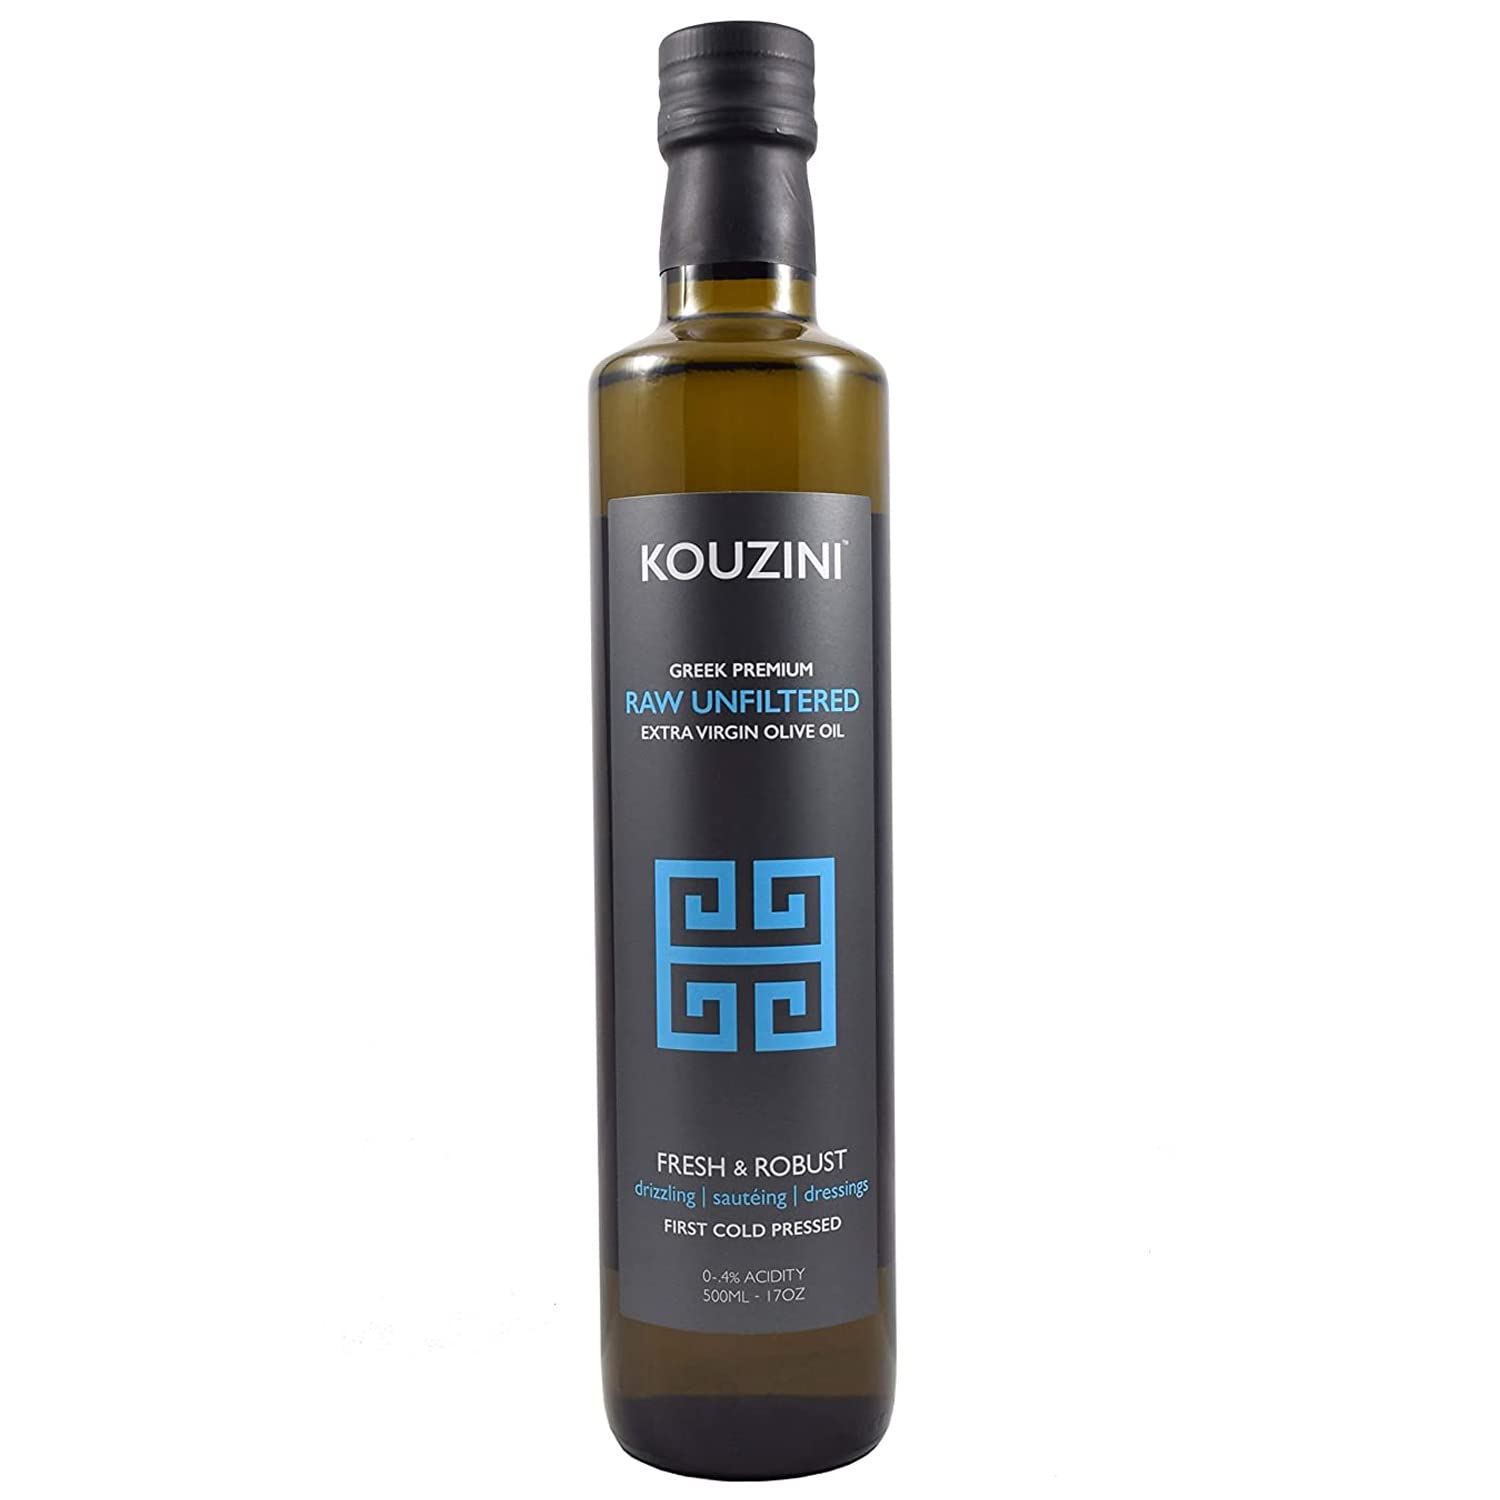 Book Cover Kouzini Unfiltered Raw Extra Virgin Greek Olive Oil, Organic Greek Extra Virgin Cold Pressed Olive Oil, Single Origin, High Polyphenols, Authentic Taste, Rich Flavor & Aroma, 500ml Glass Bottle